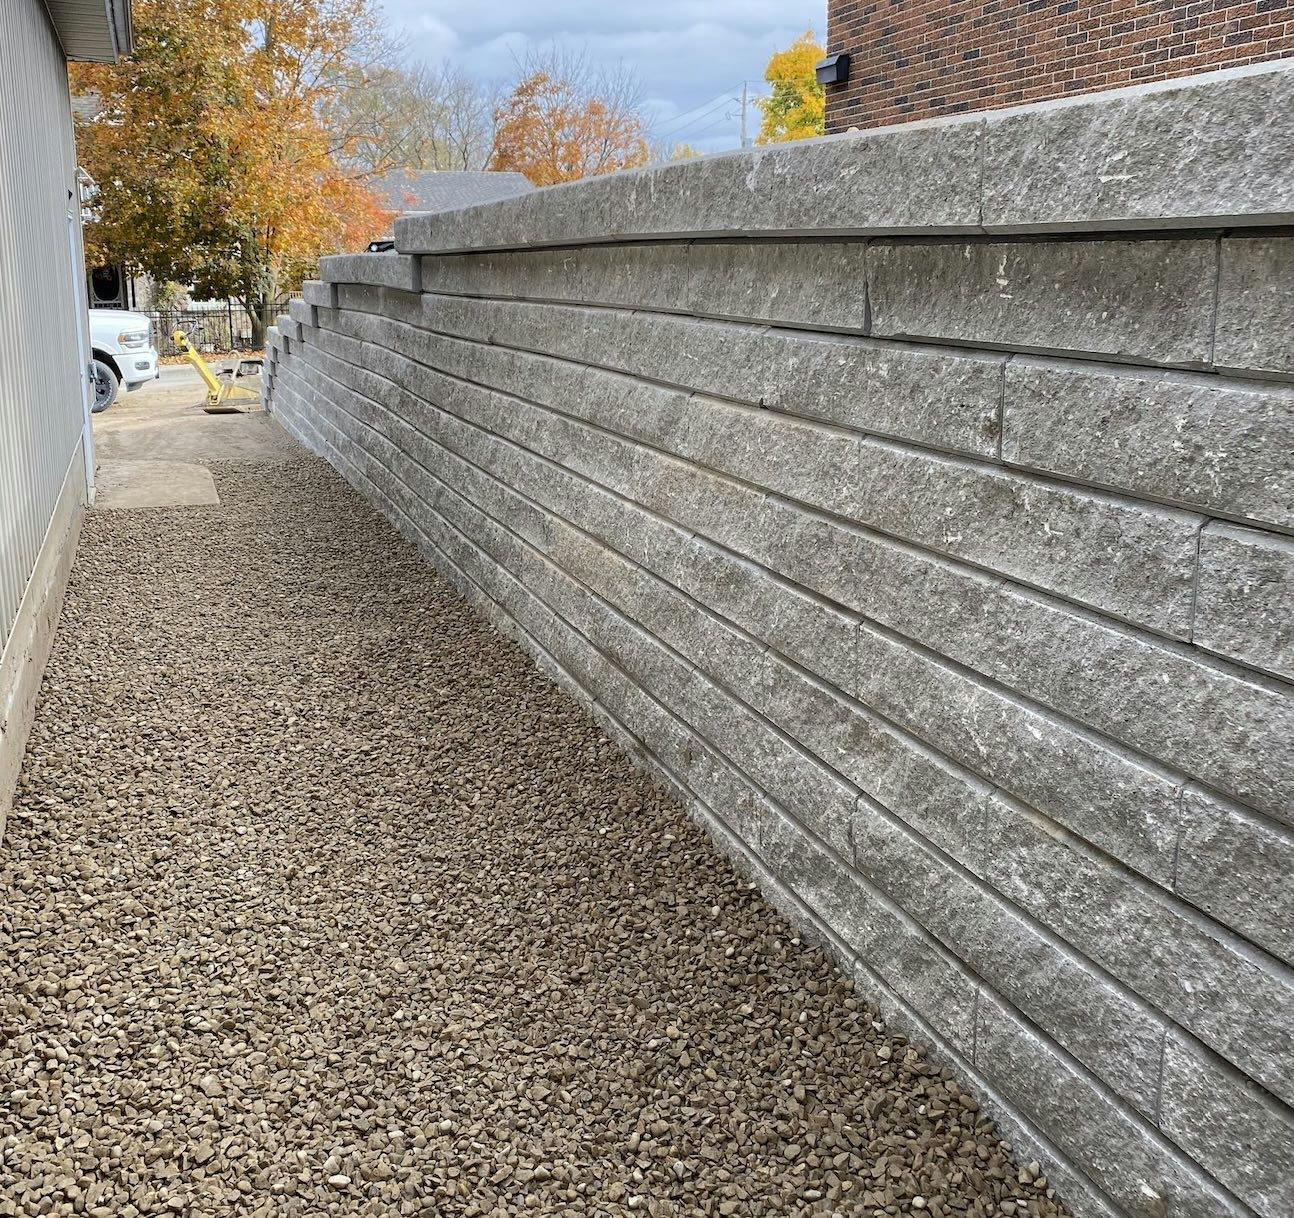 Beautiful grey four foot stone retaining wall separates two yards. One yard is at a higher elevation than the one next to it. The lower homes's side yard is lined with a nice pebbled rock treatment. 